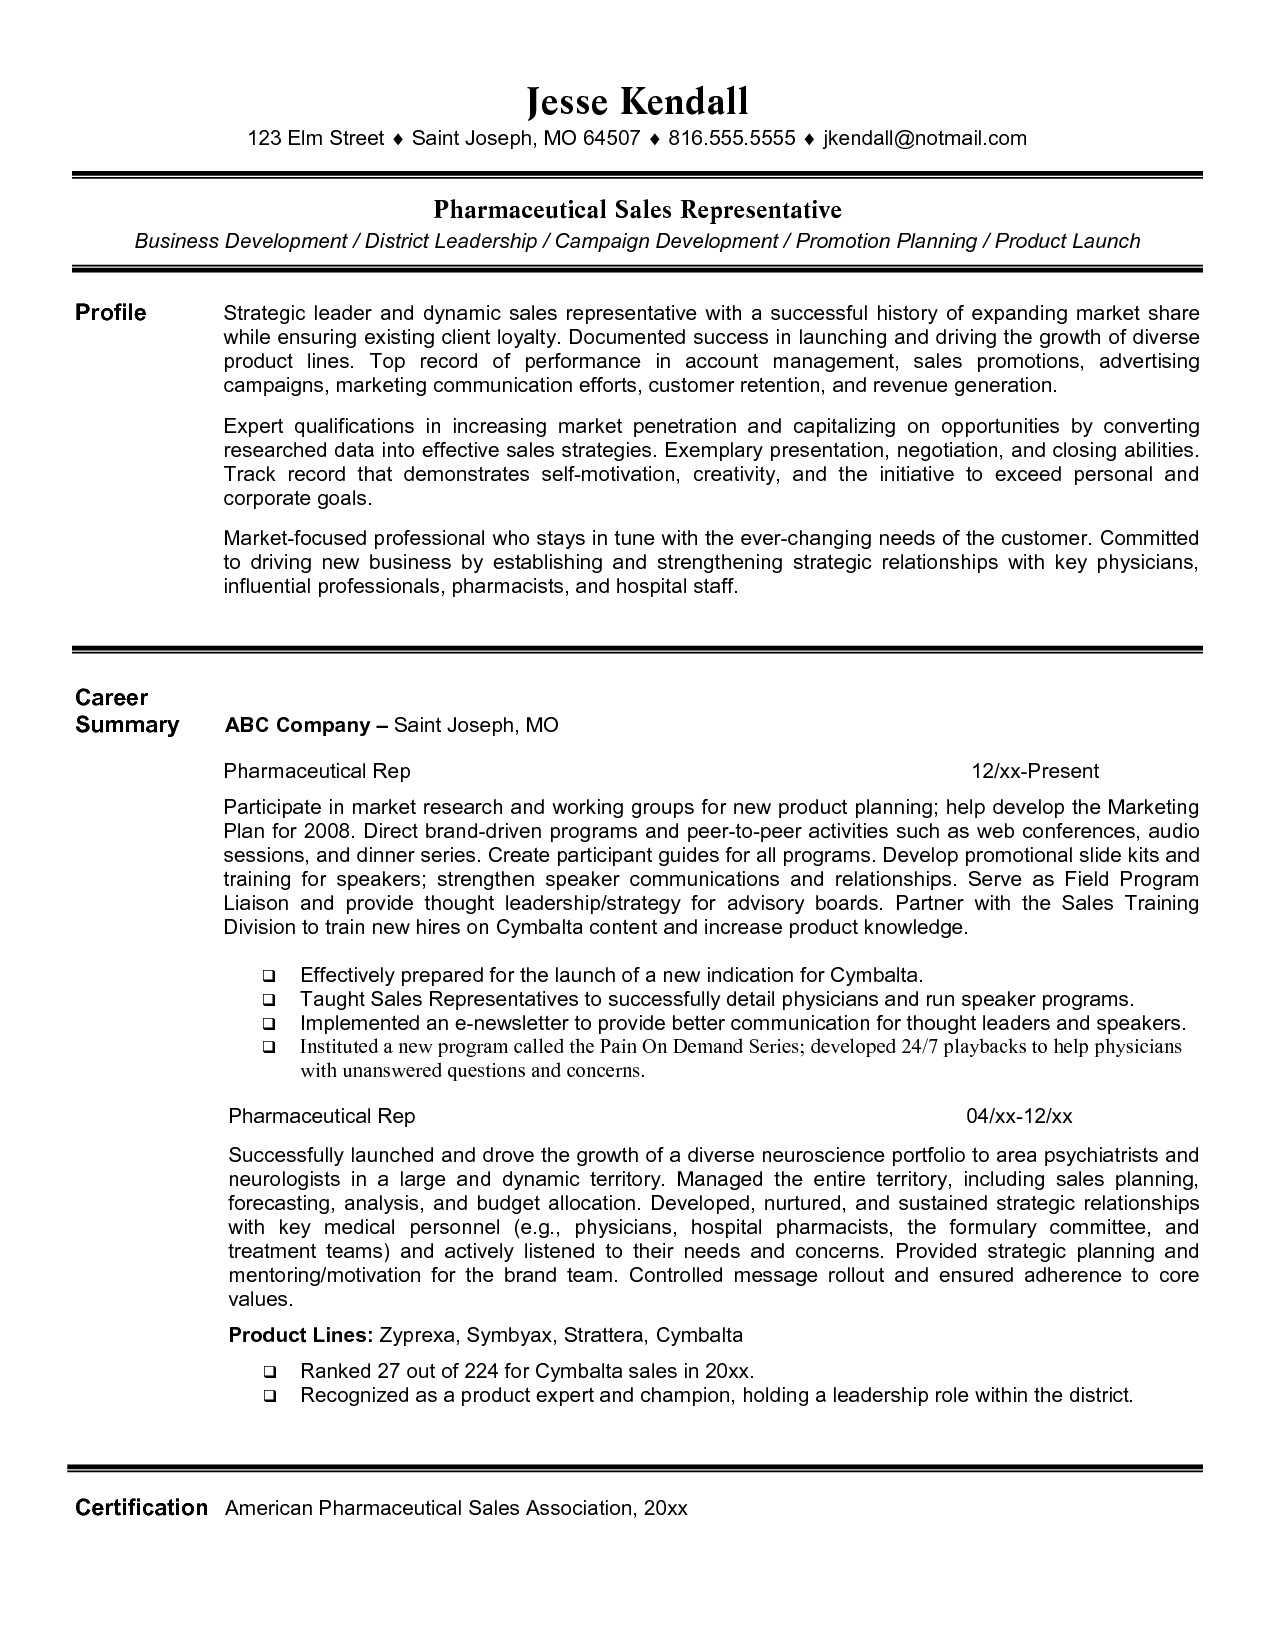 Entry Level Pharmaceutical Sales Rep Resume Sample Pharmaceutical Sales Resume Entry Level